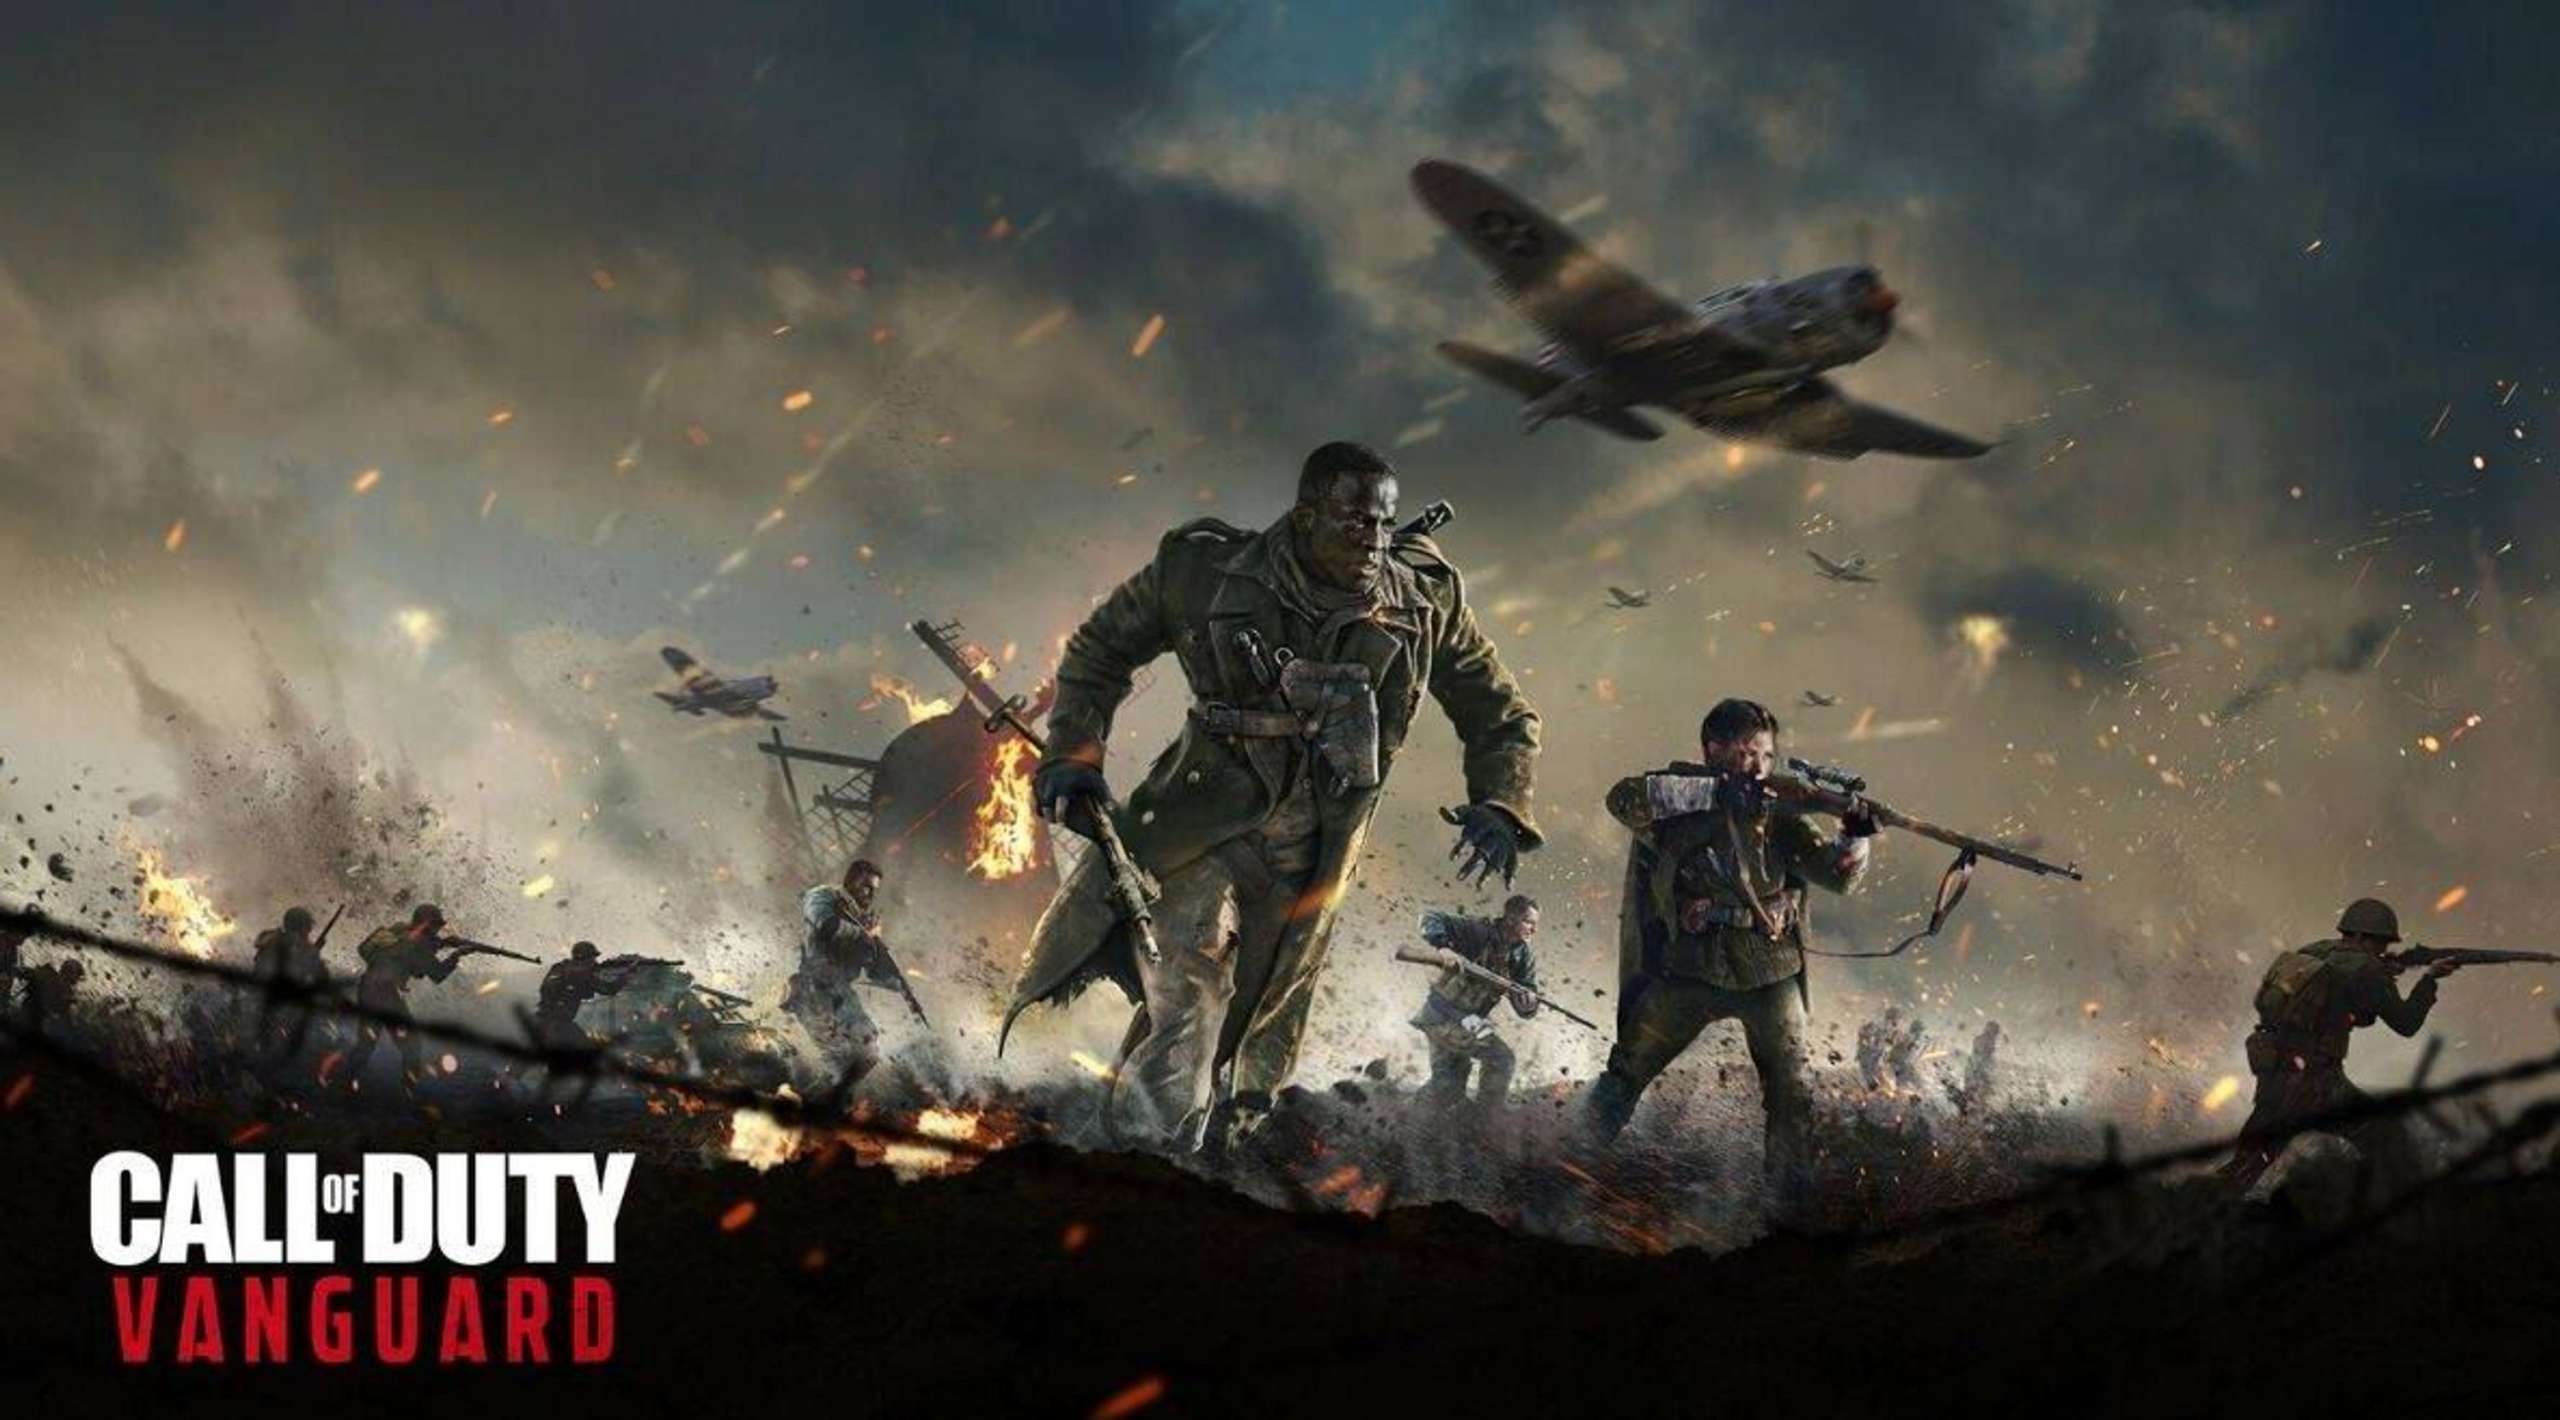 For One Week, You May Play Call of Duty: Vanguard Multiplayer And Zombies For Free